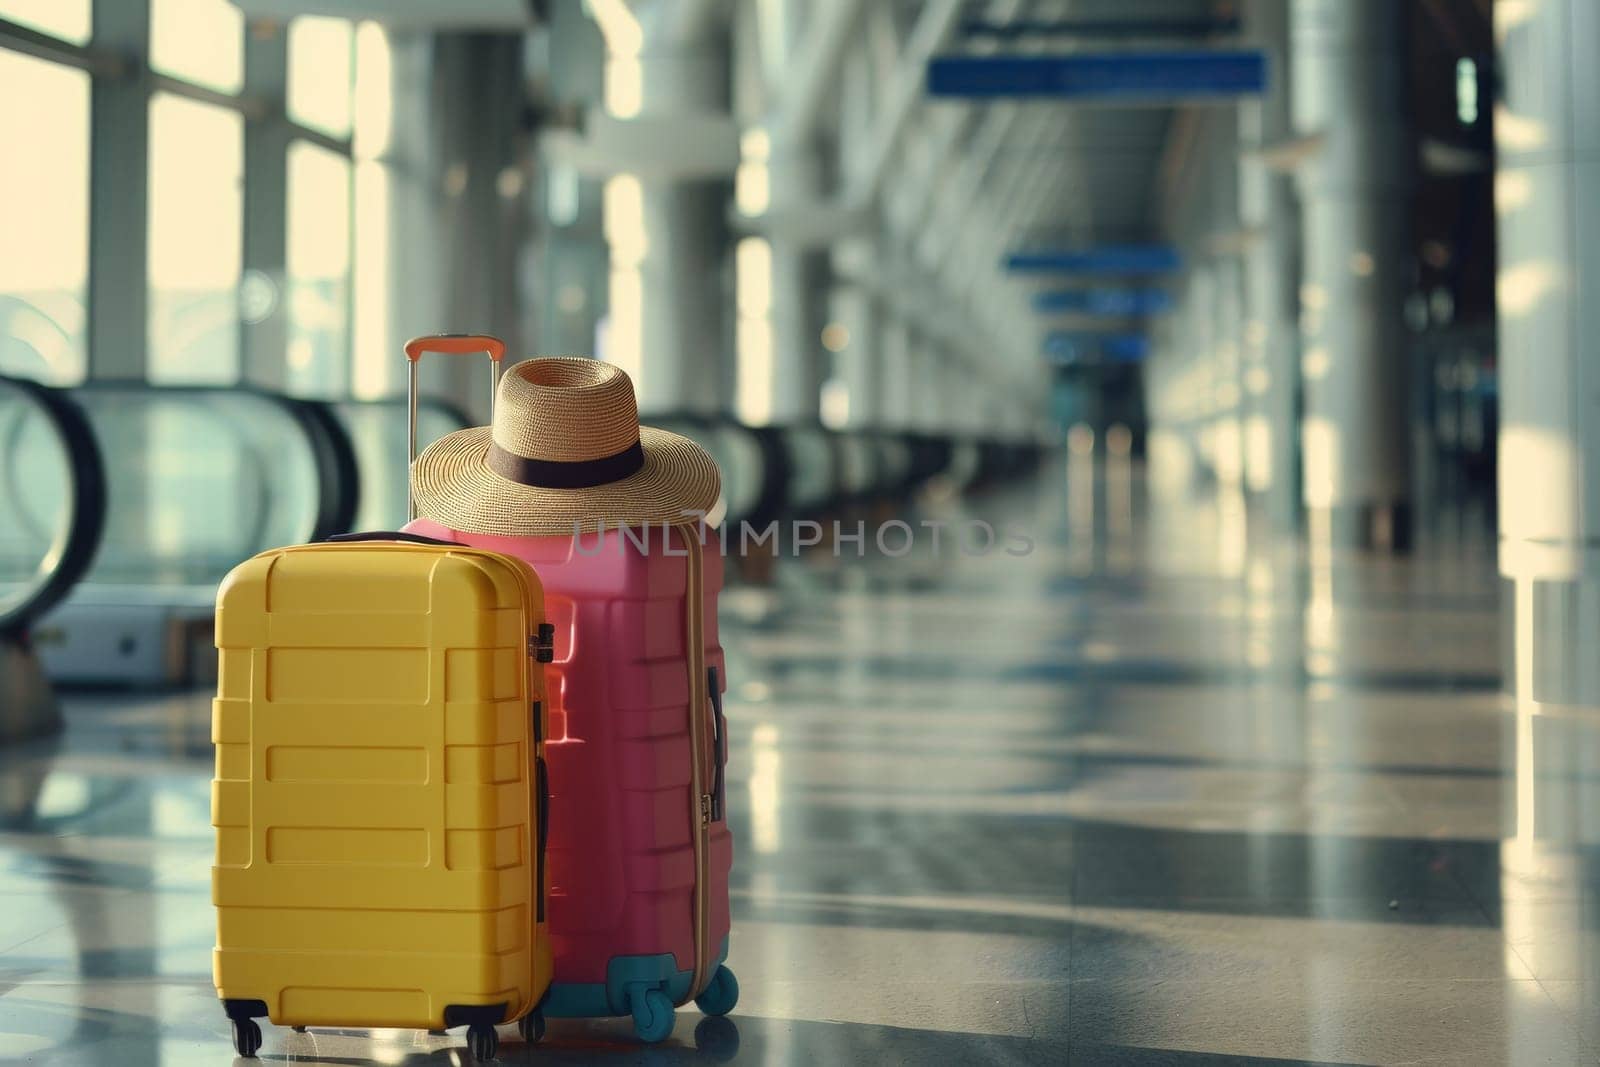 Suitcase and hat in airport terminal waiting area hall, travel concept, summer vacation.